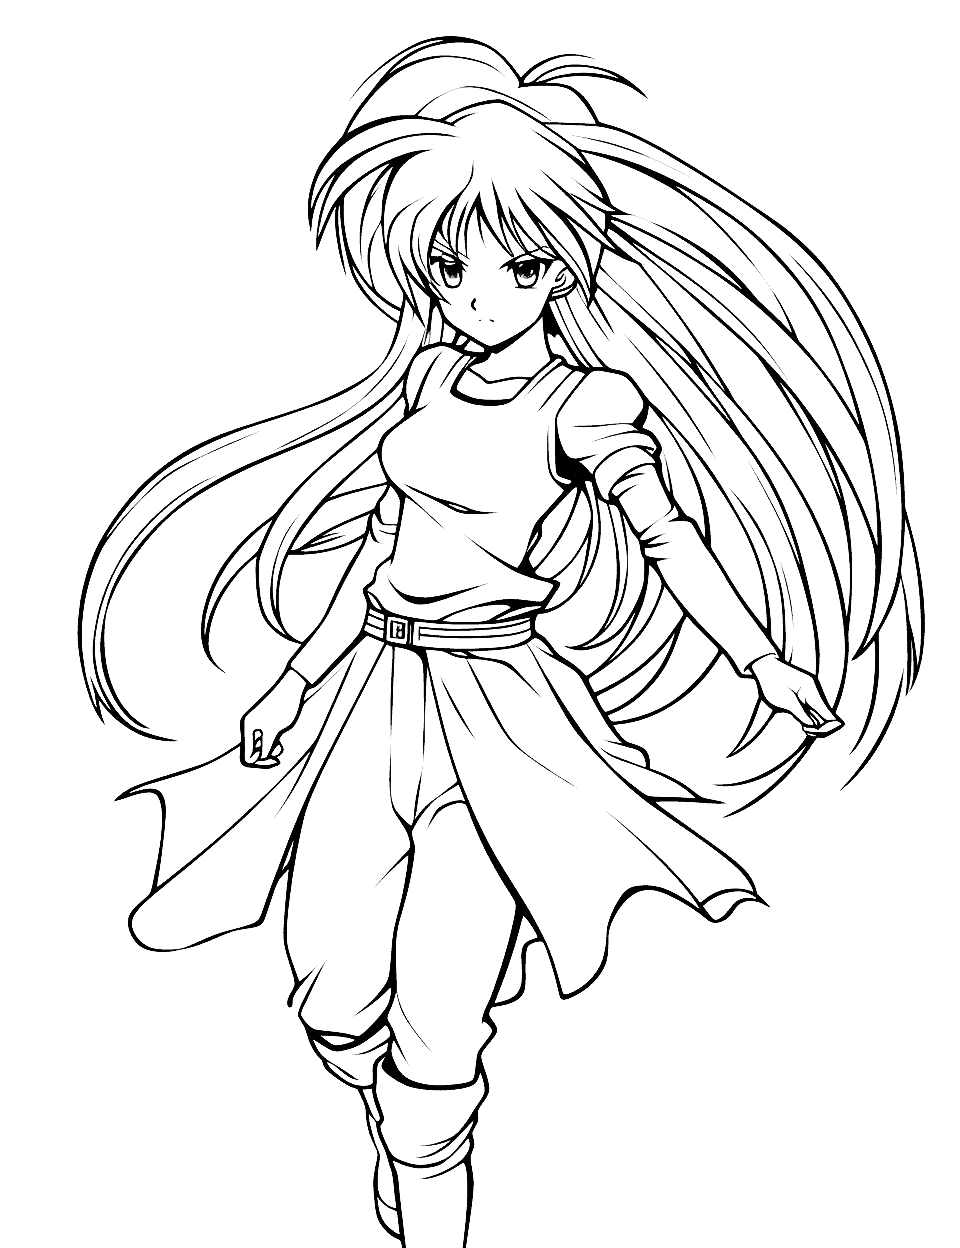 Long-Haired Anime Angel Coloring Page - An anime angel with long, flowing hair, gracefully descending from the sky.